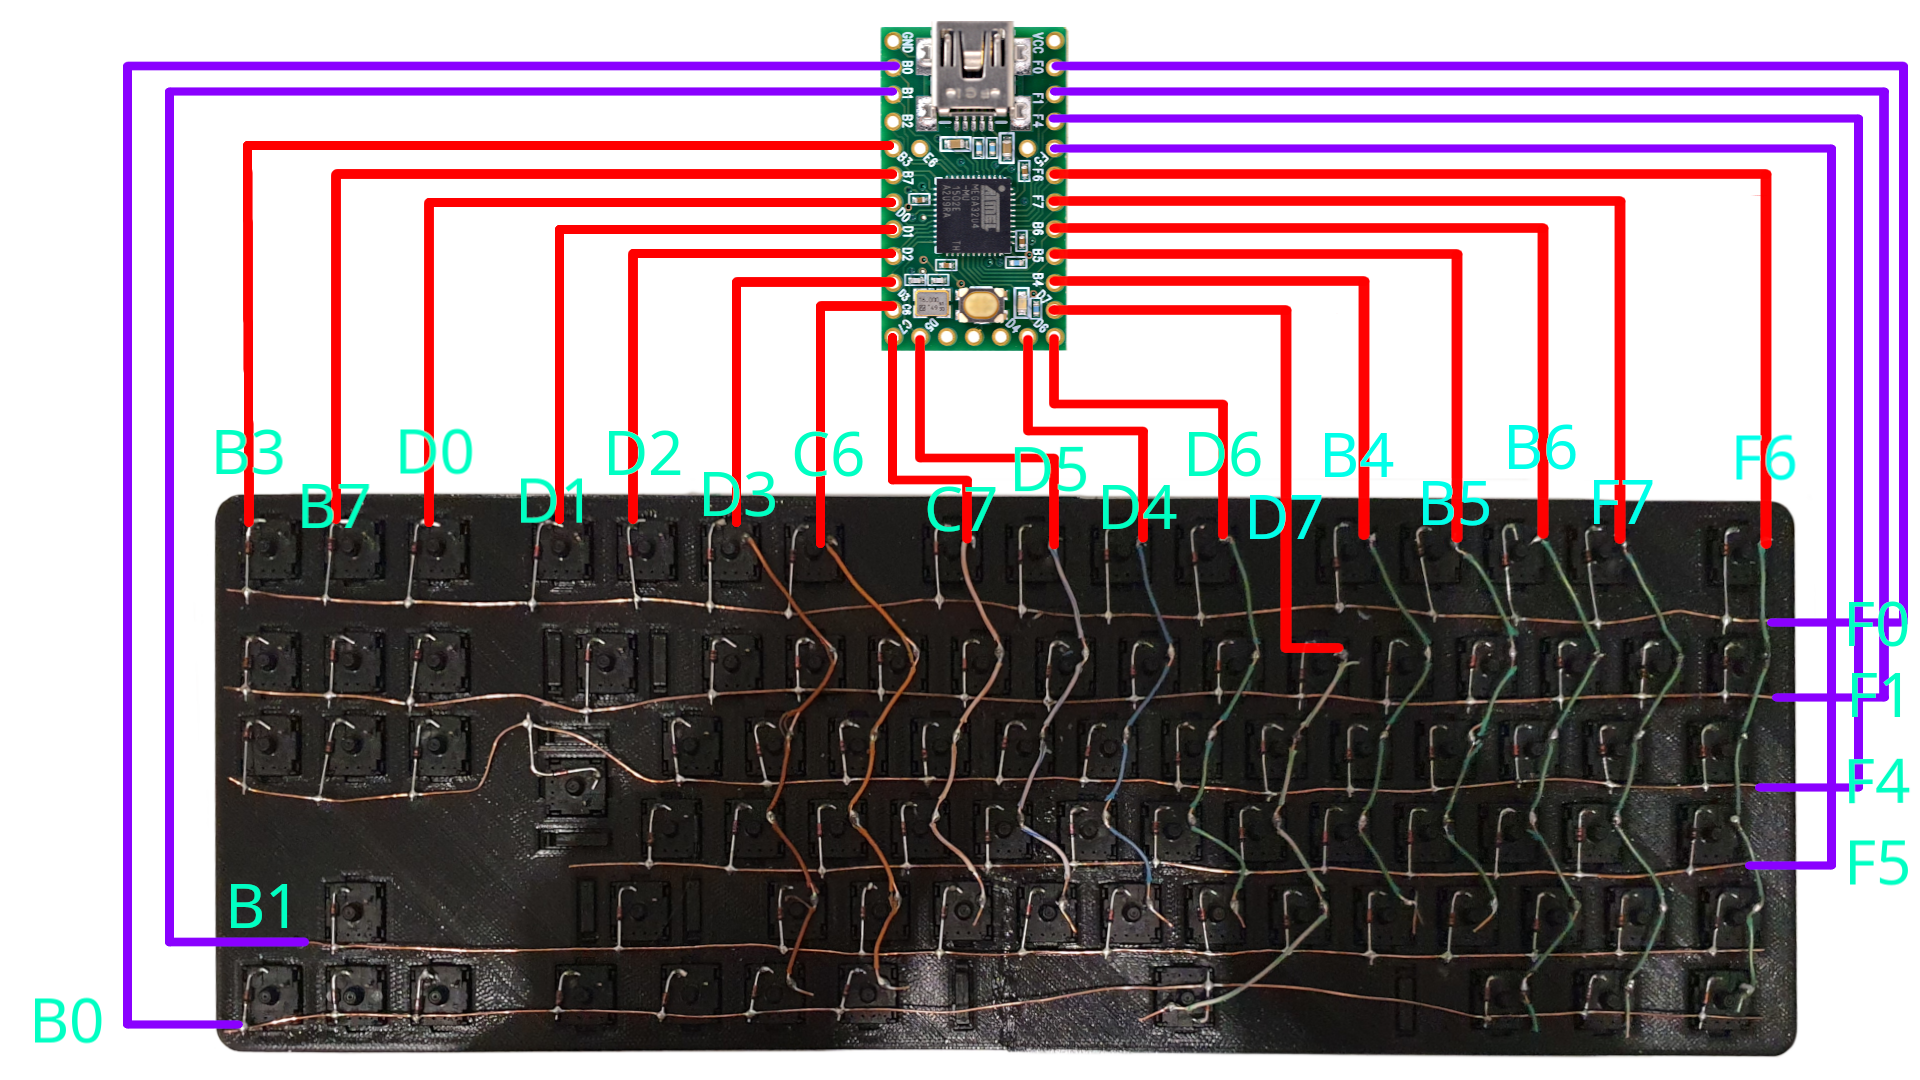 a wiring diagram of the board